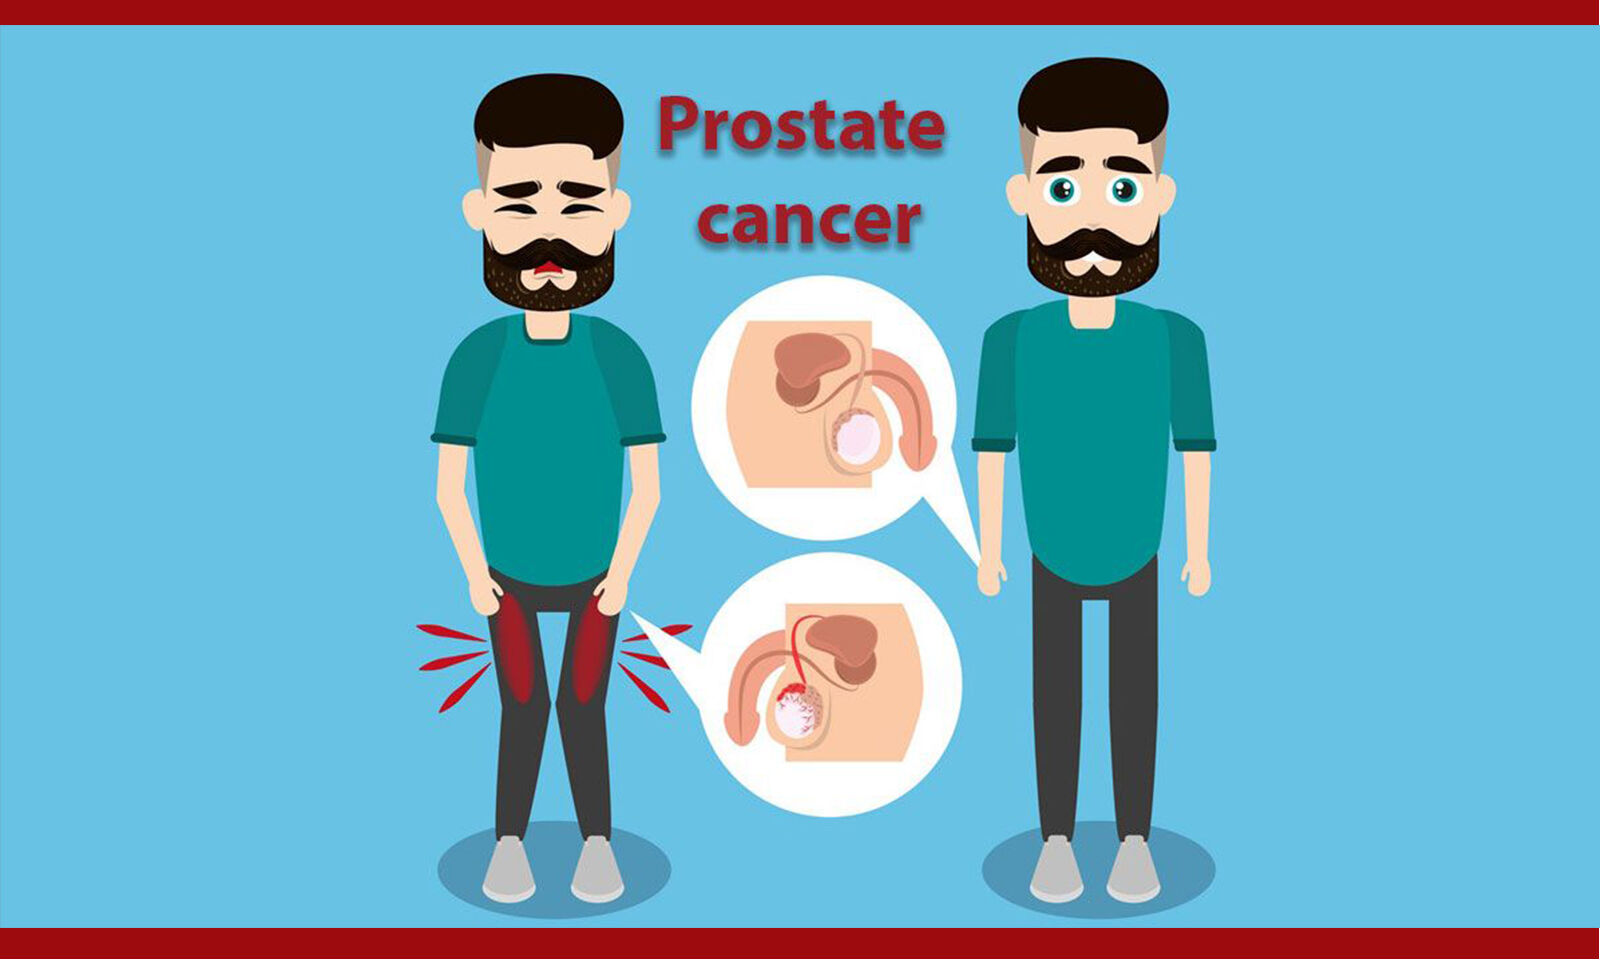 What are the signs of prostate cancer